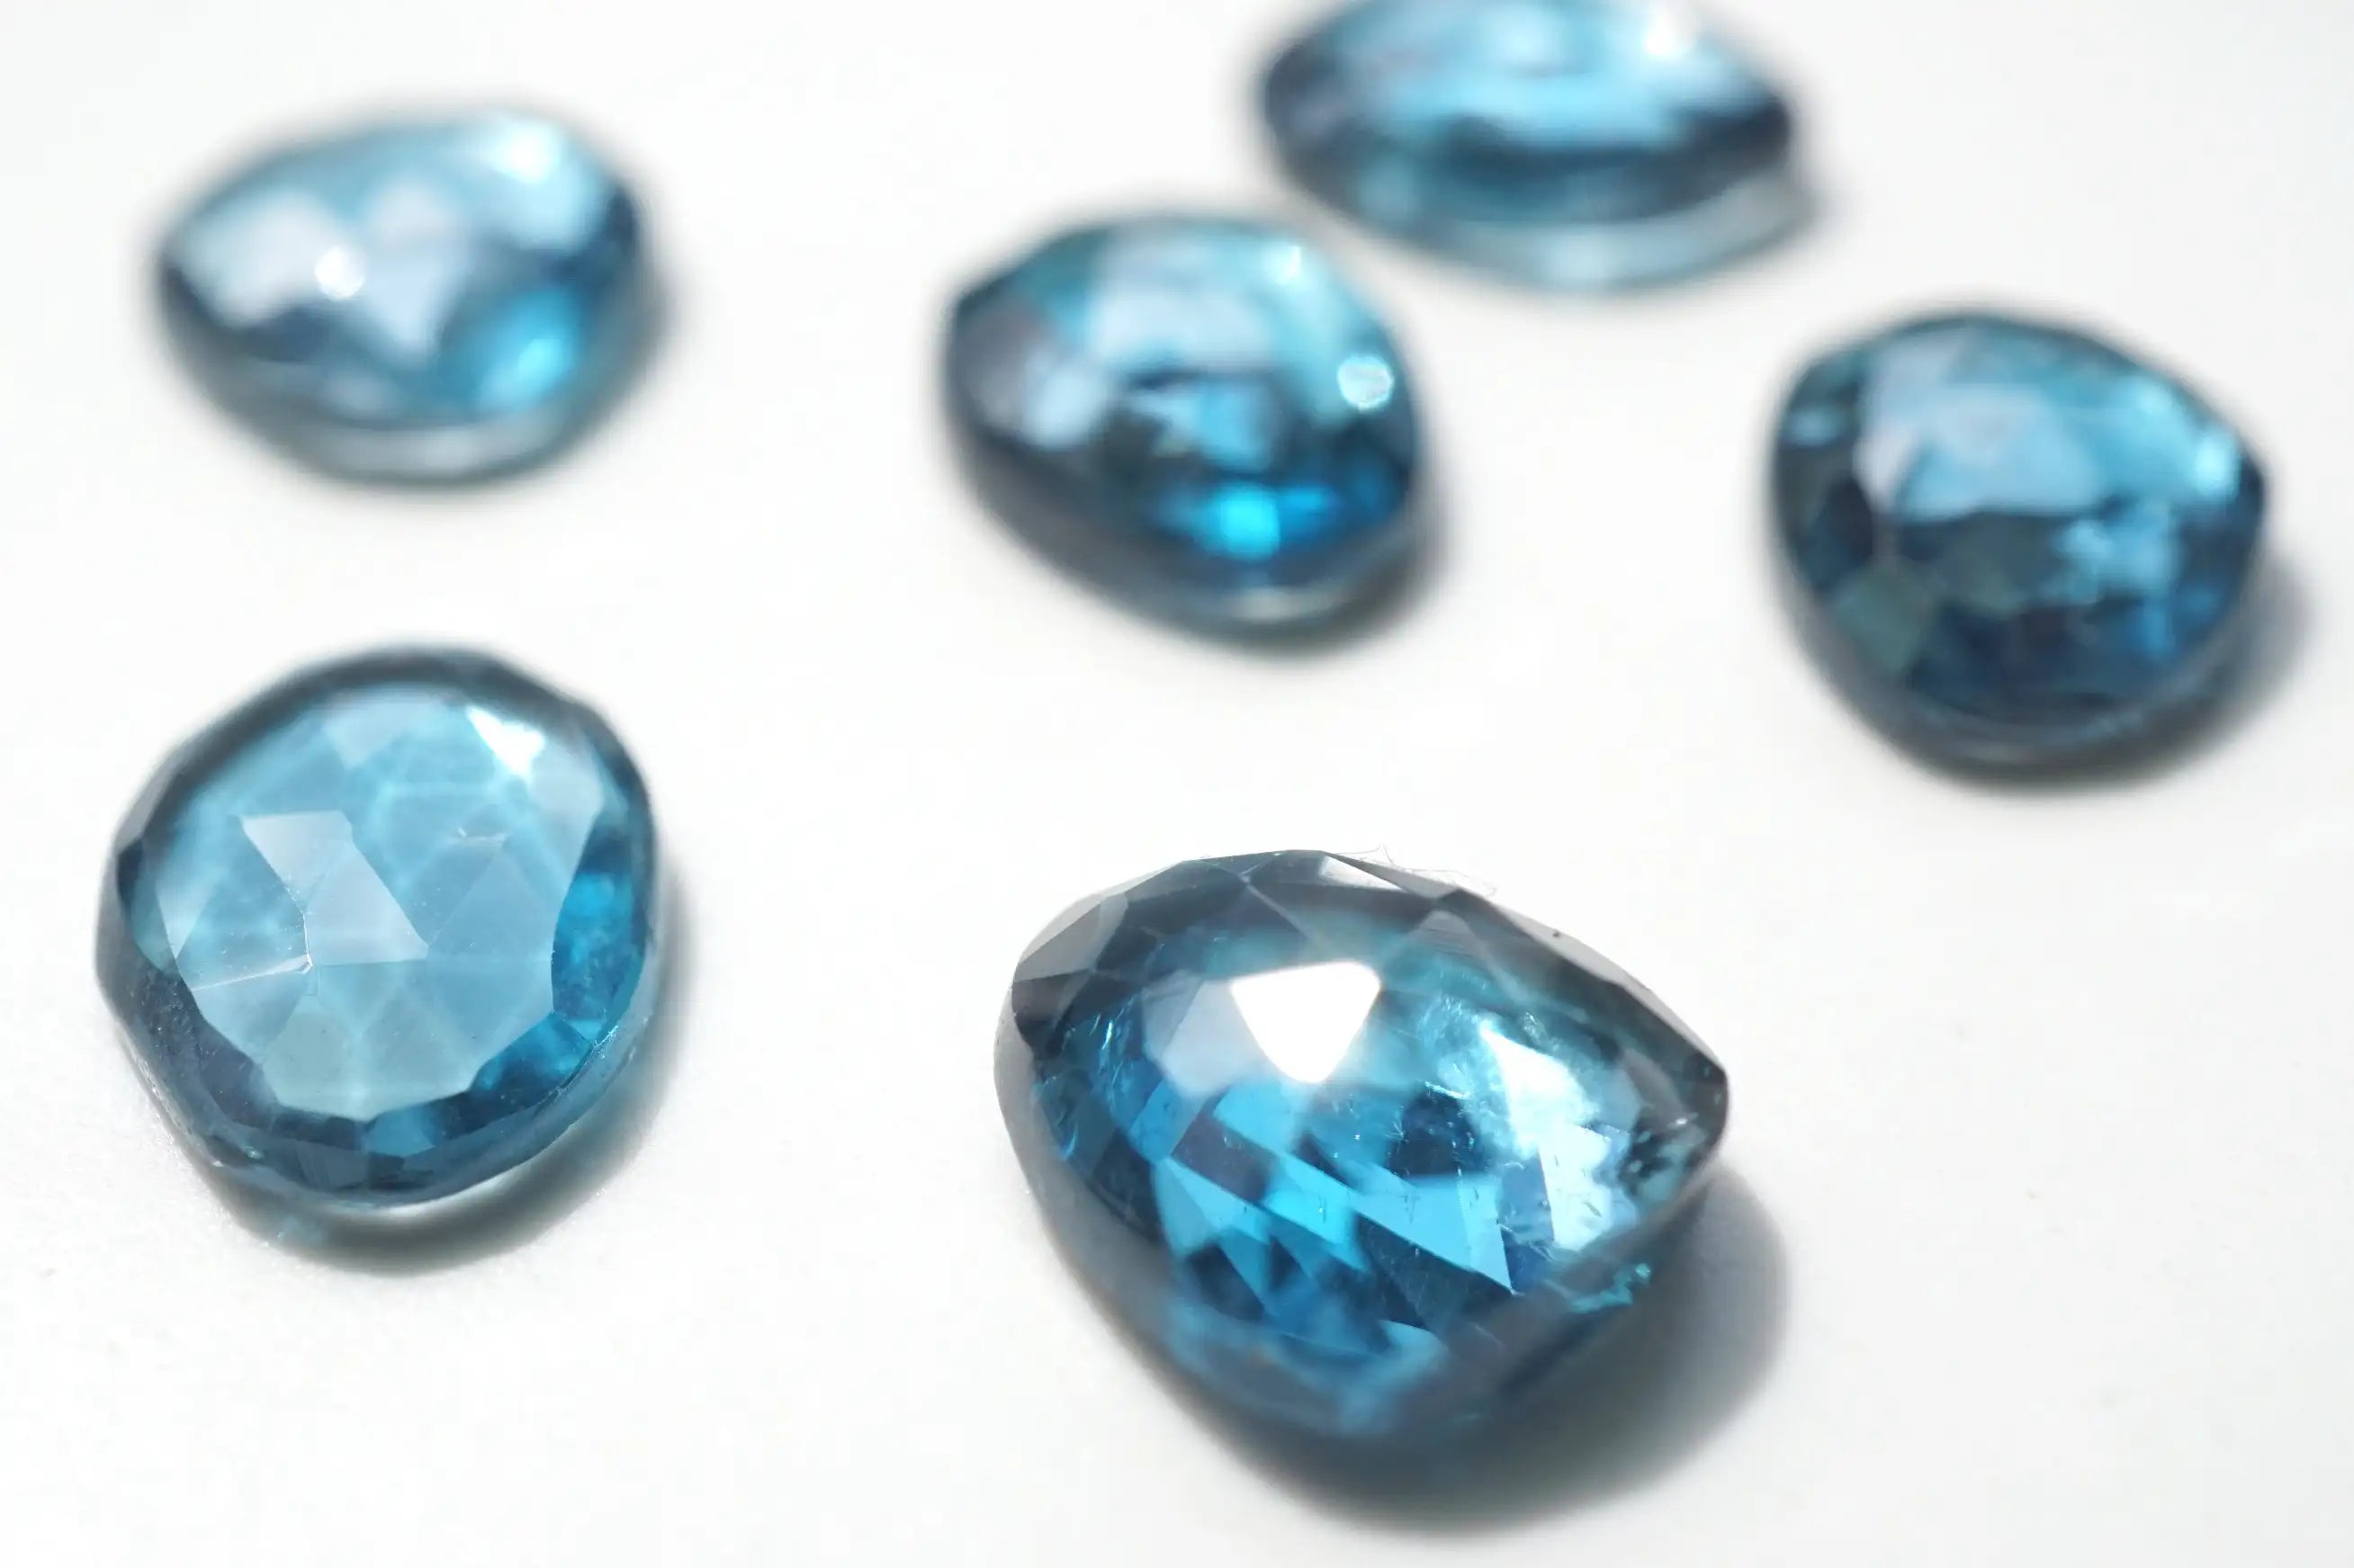 Topaz: A Gemstone of Courage, Strength, and Healing